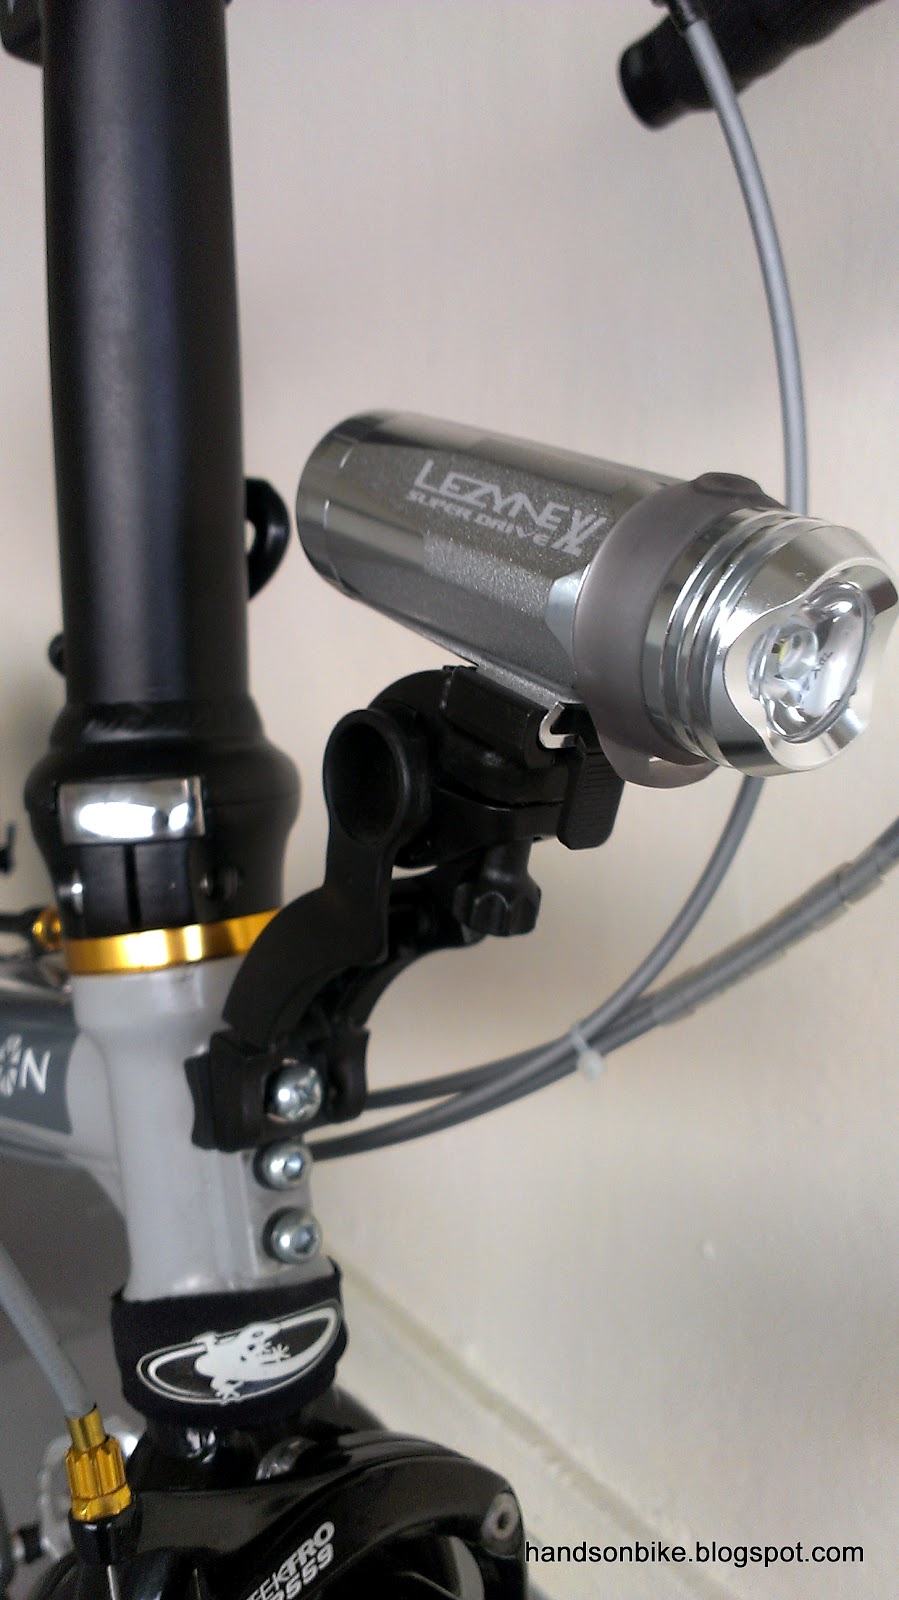 Hands On Bike: Lezyne Super Drive XL: In Depth Review